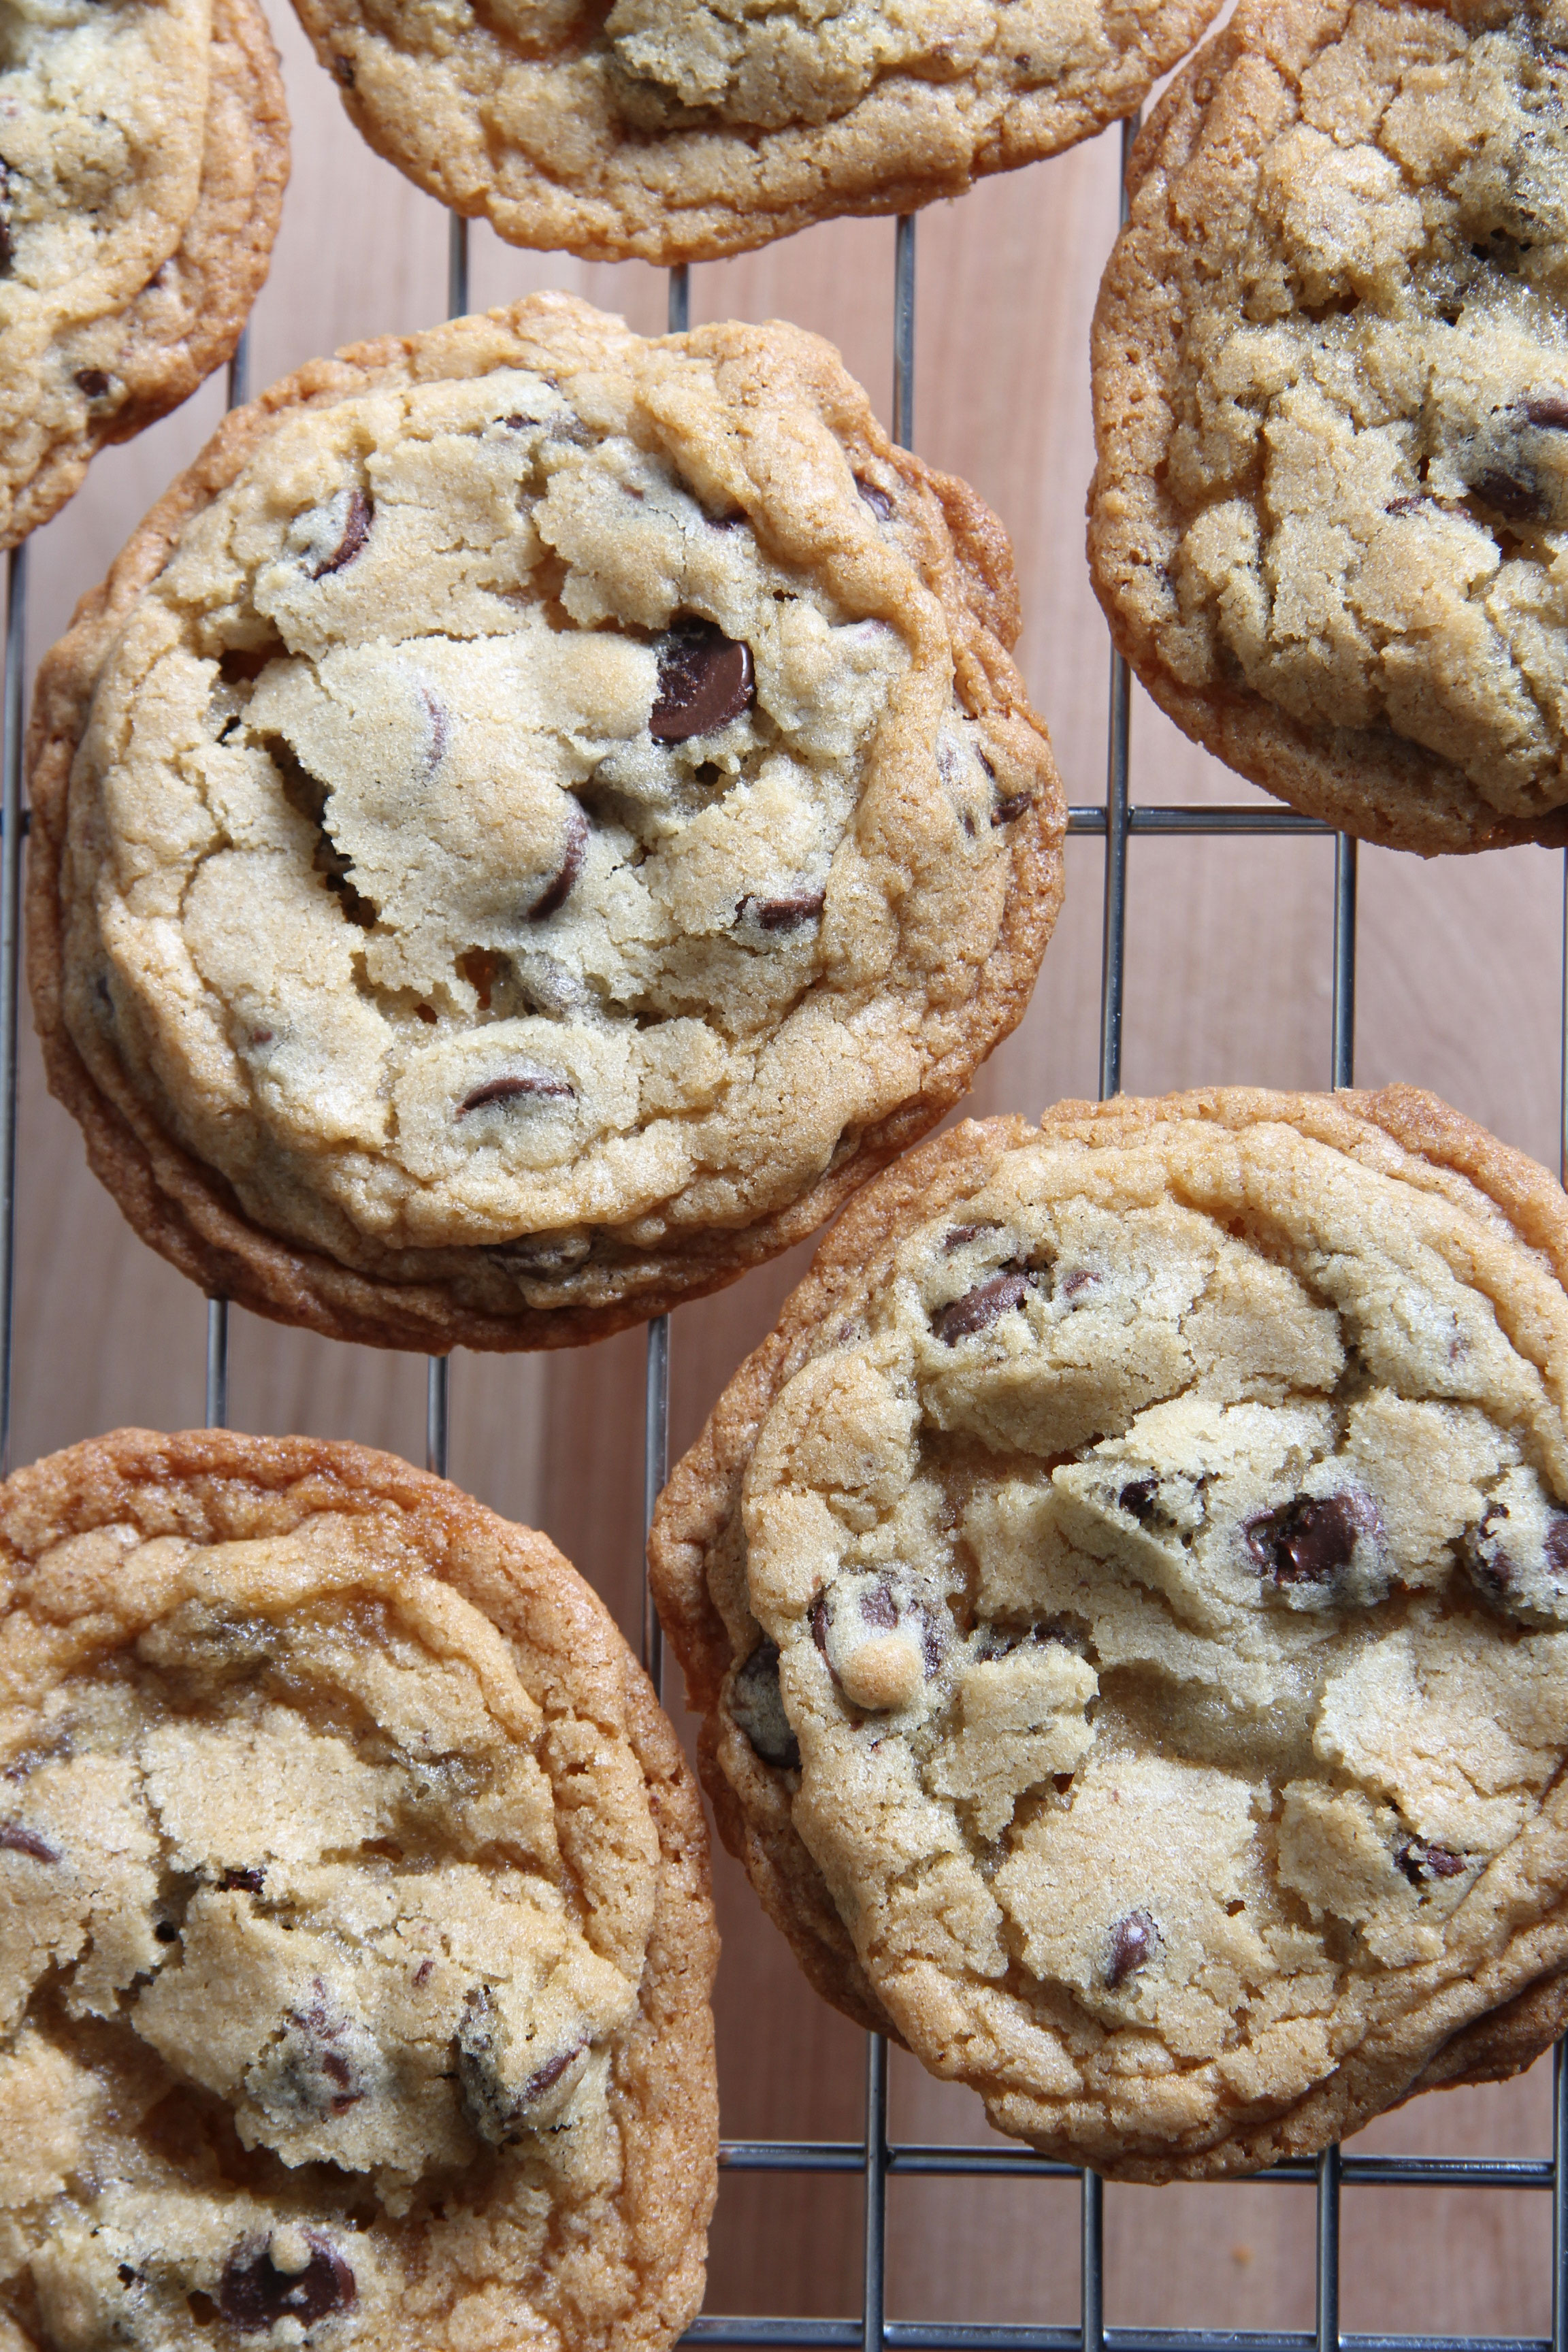 These are Best Chocolate Chip Cookies Ever.. Full of semi-sweet chocolate and a little sea salt to make the flavor pop. They are worth every bite!